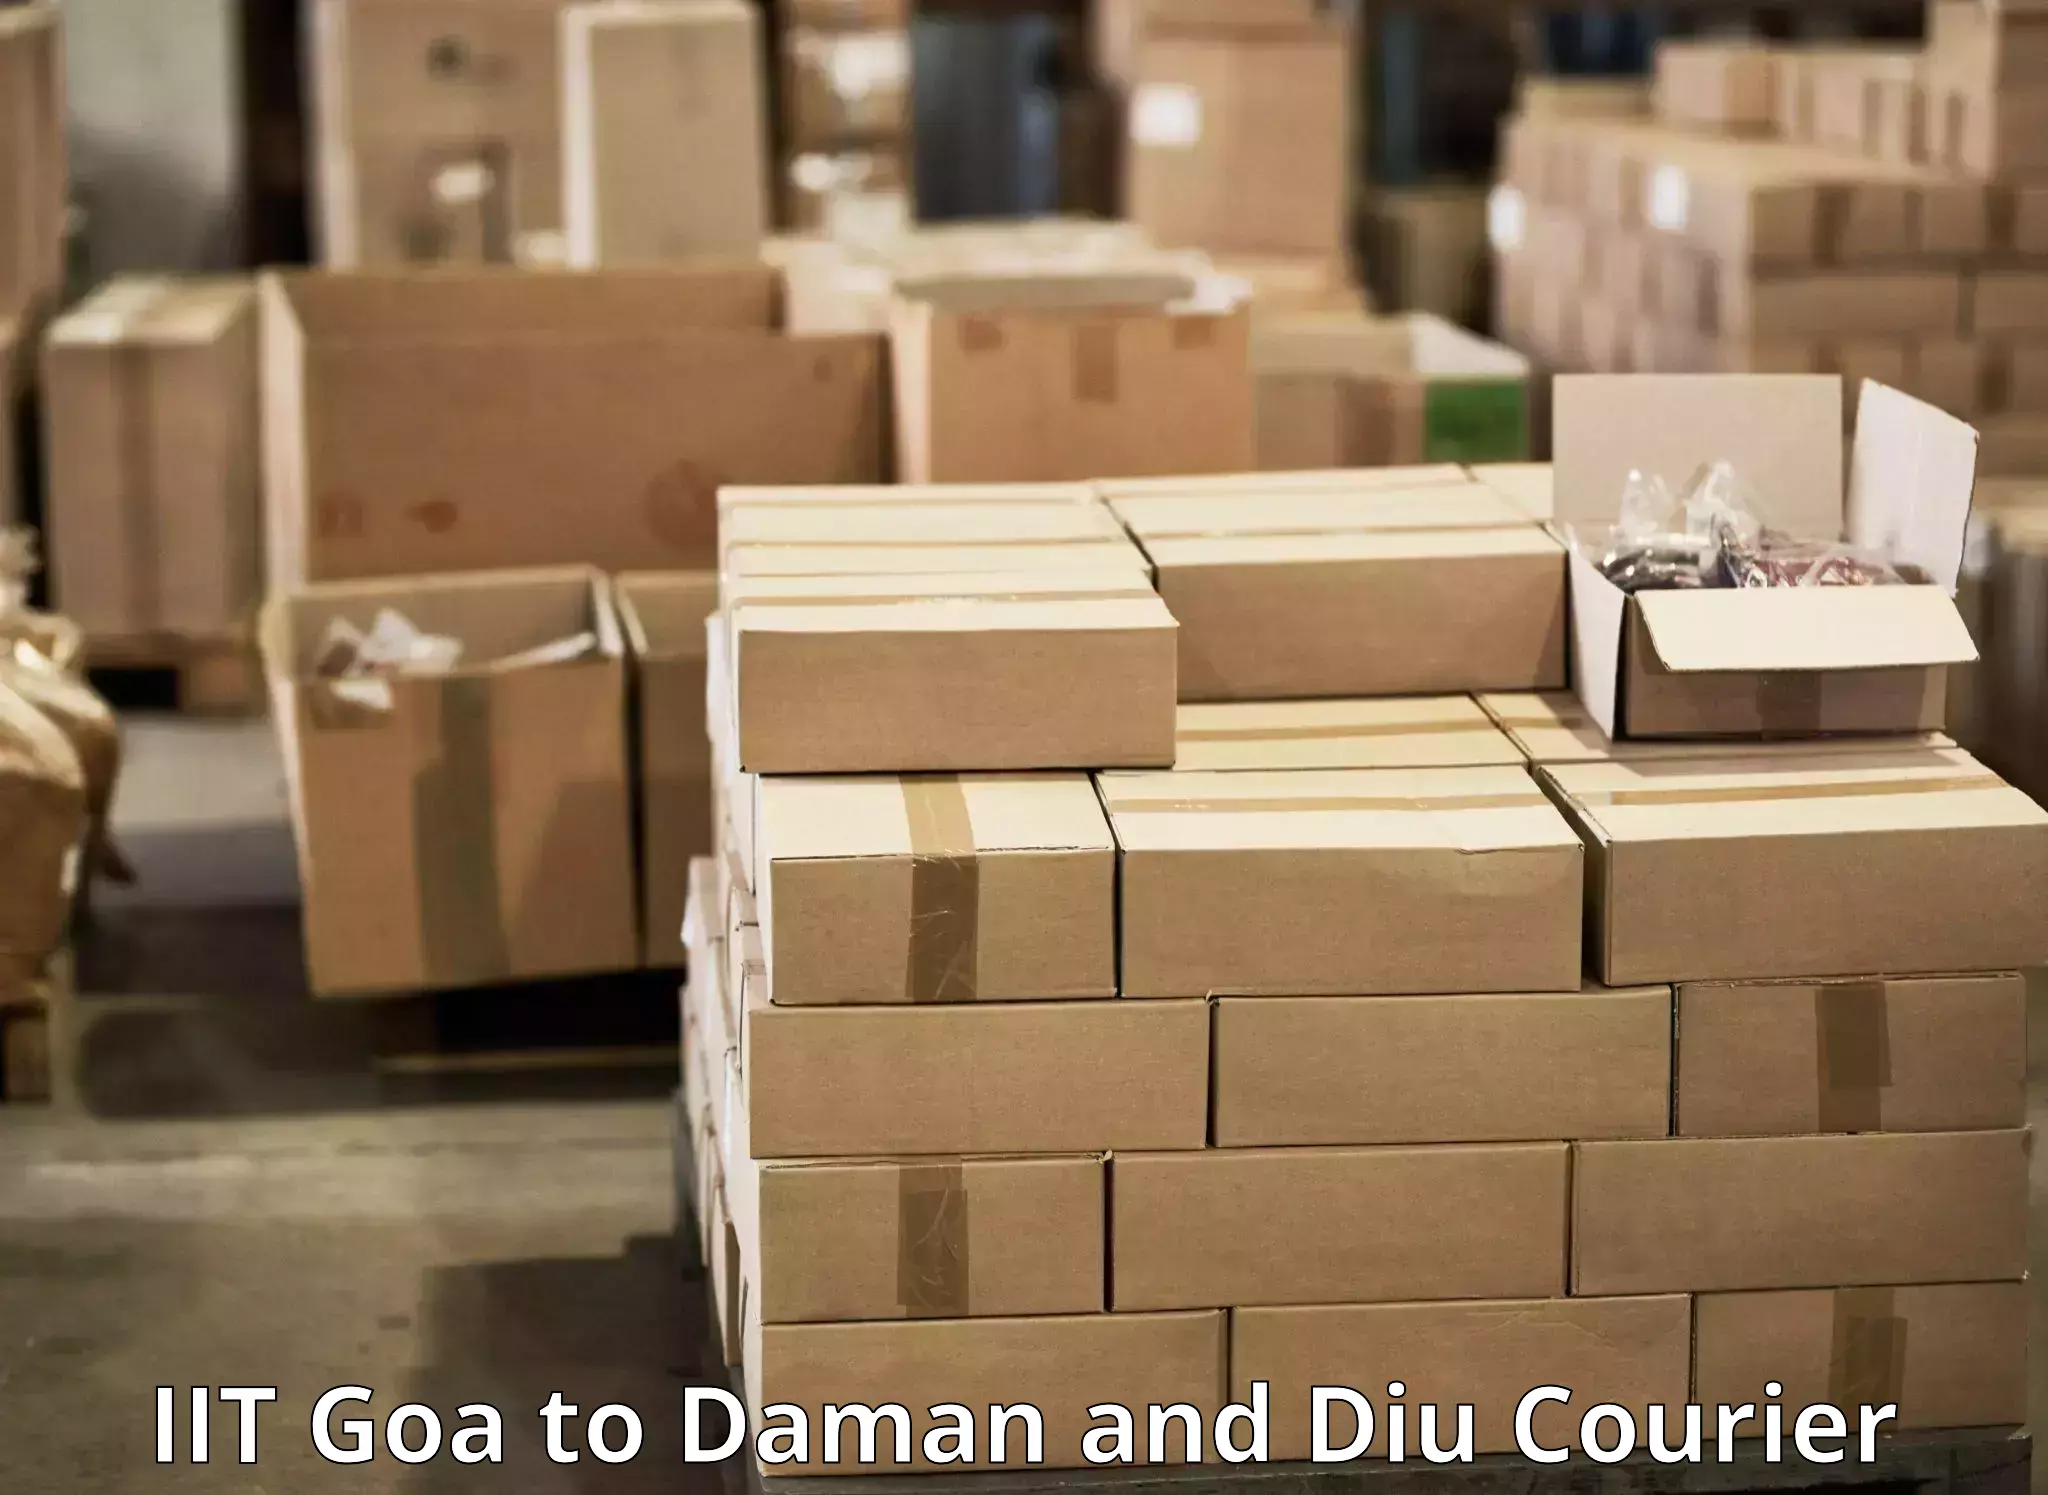 Parcel delivery IIT Goa to Diu